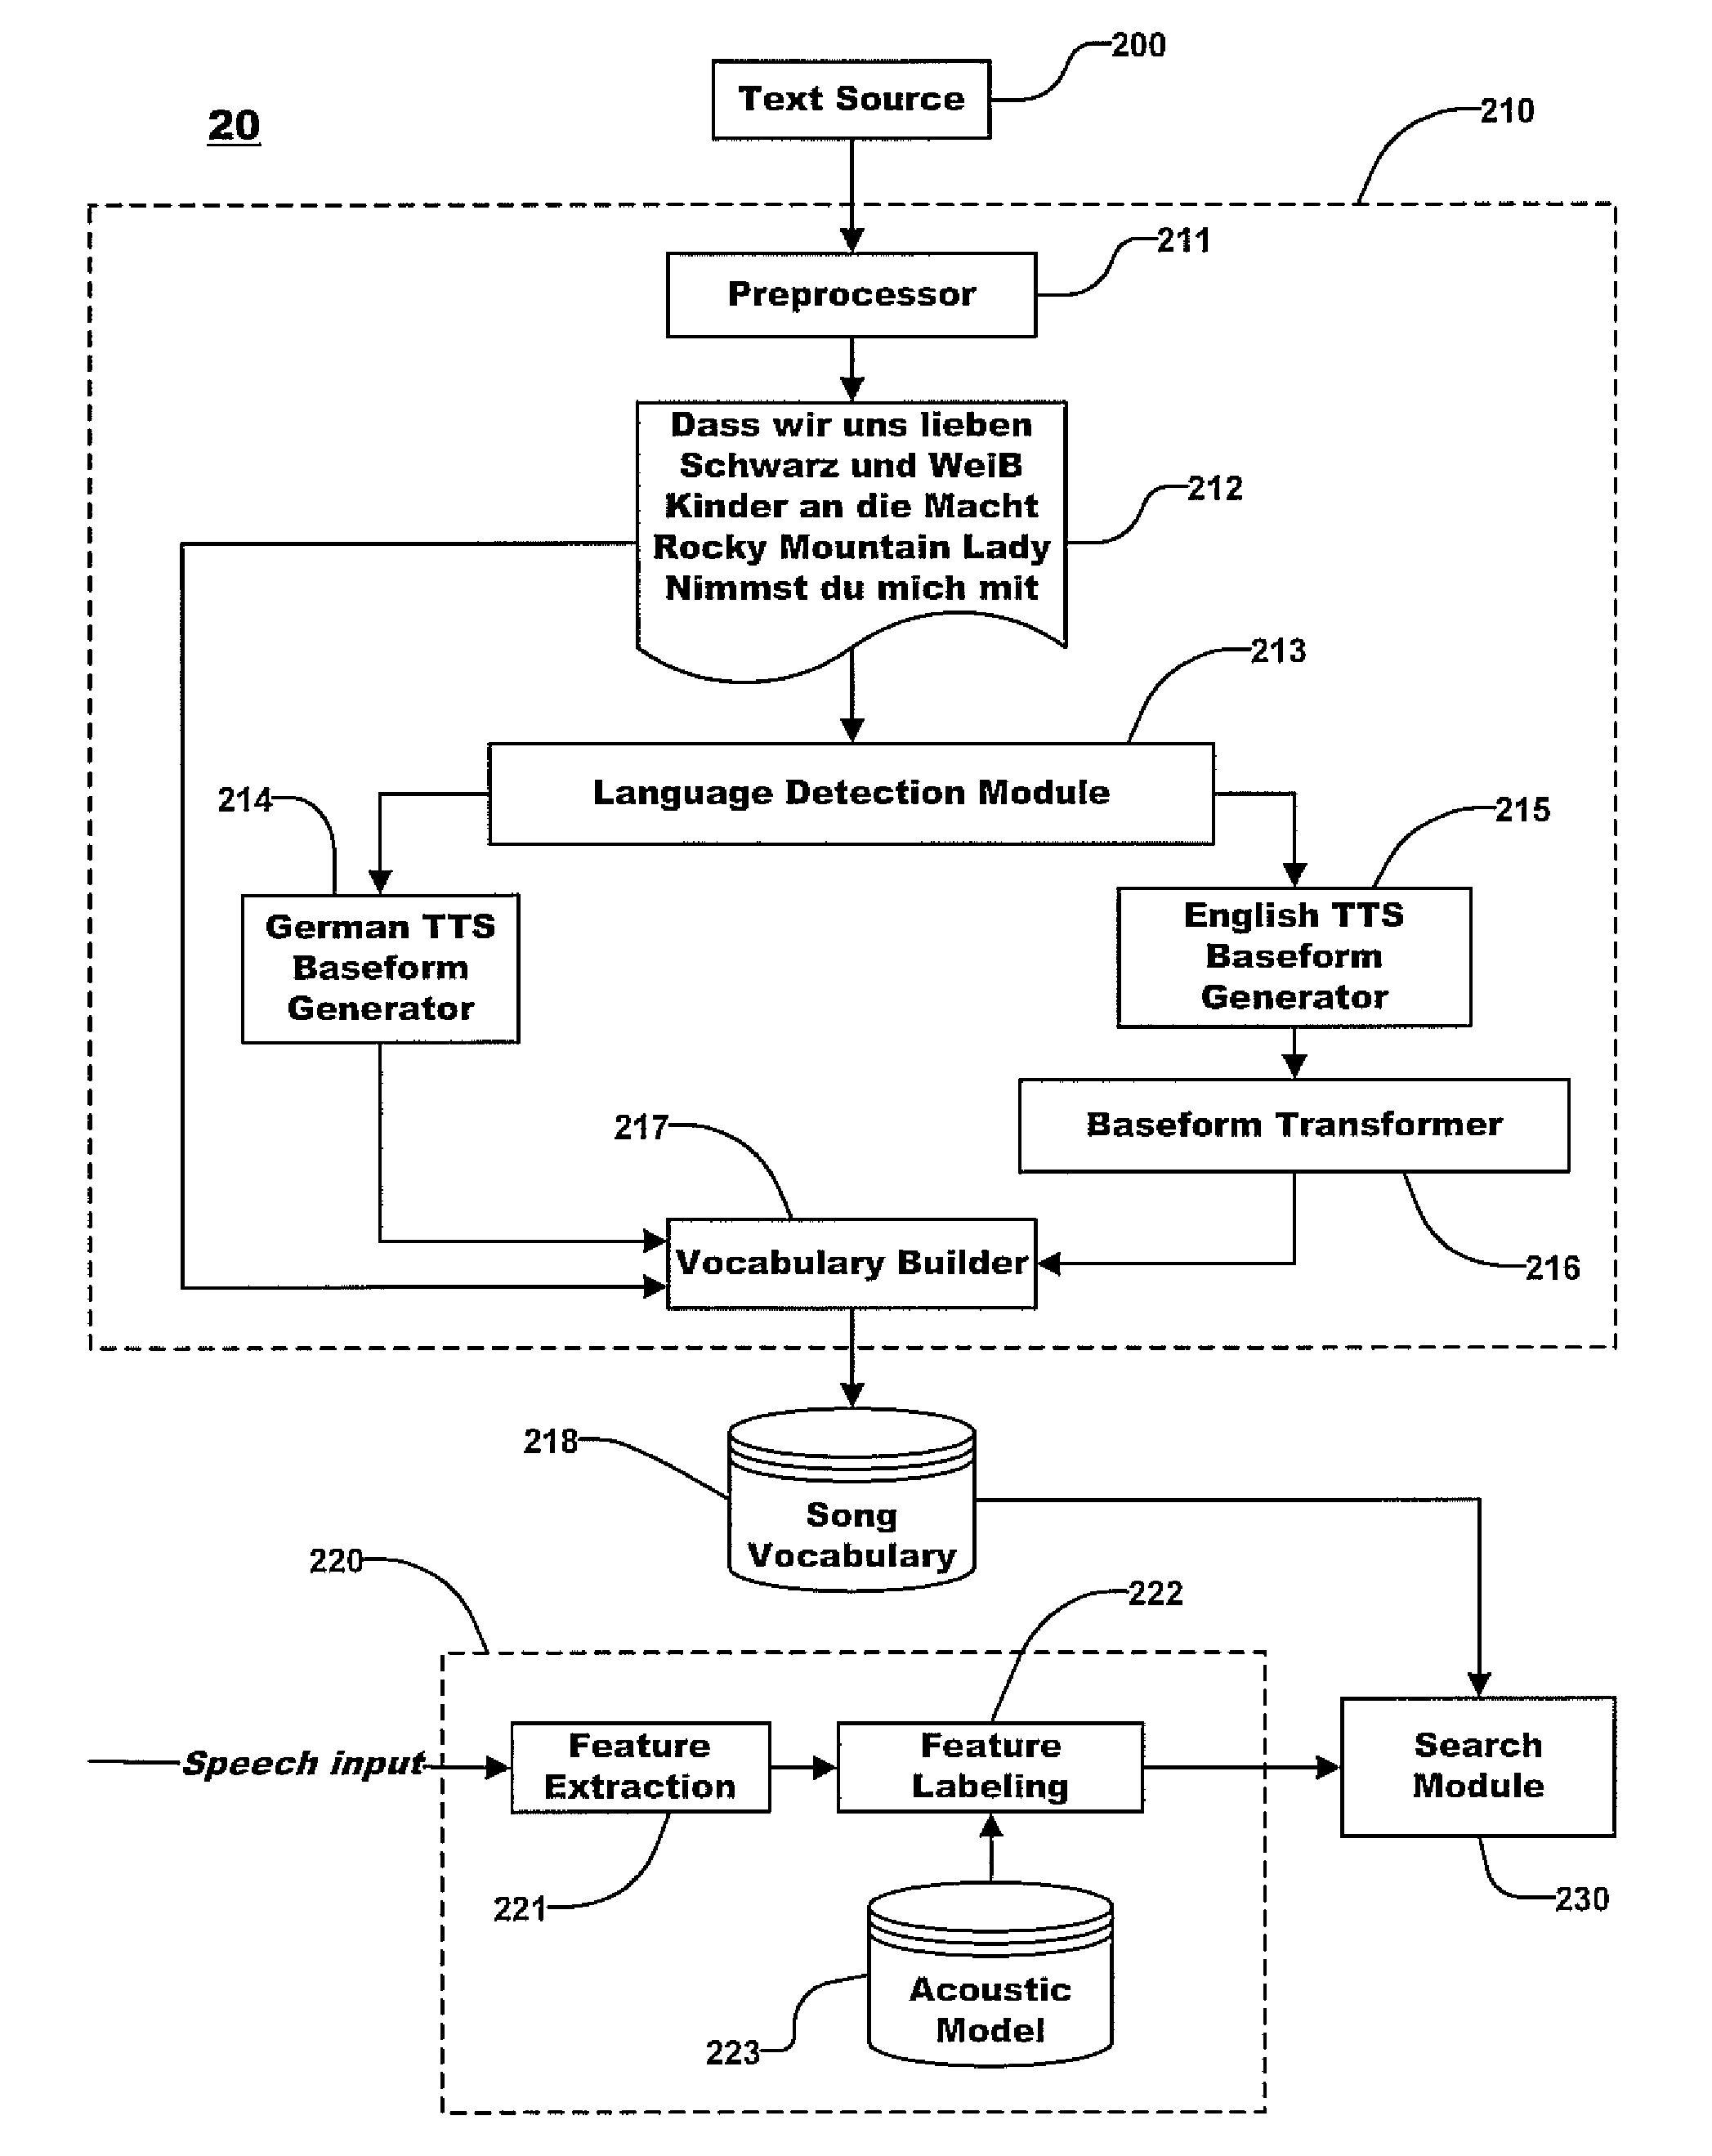 Systems and methods for building a native language phoneme lexicon having native pronunciations of non-native words derived from non-native pronunciations